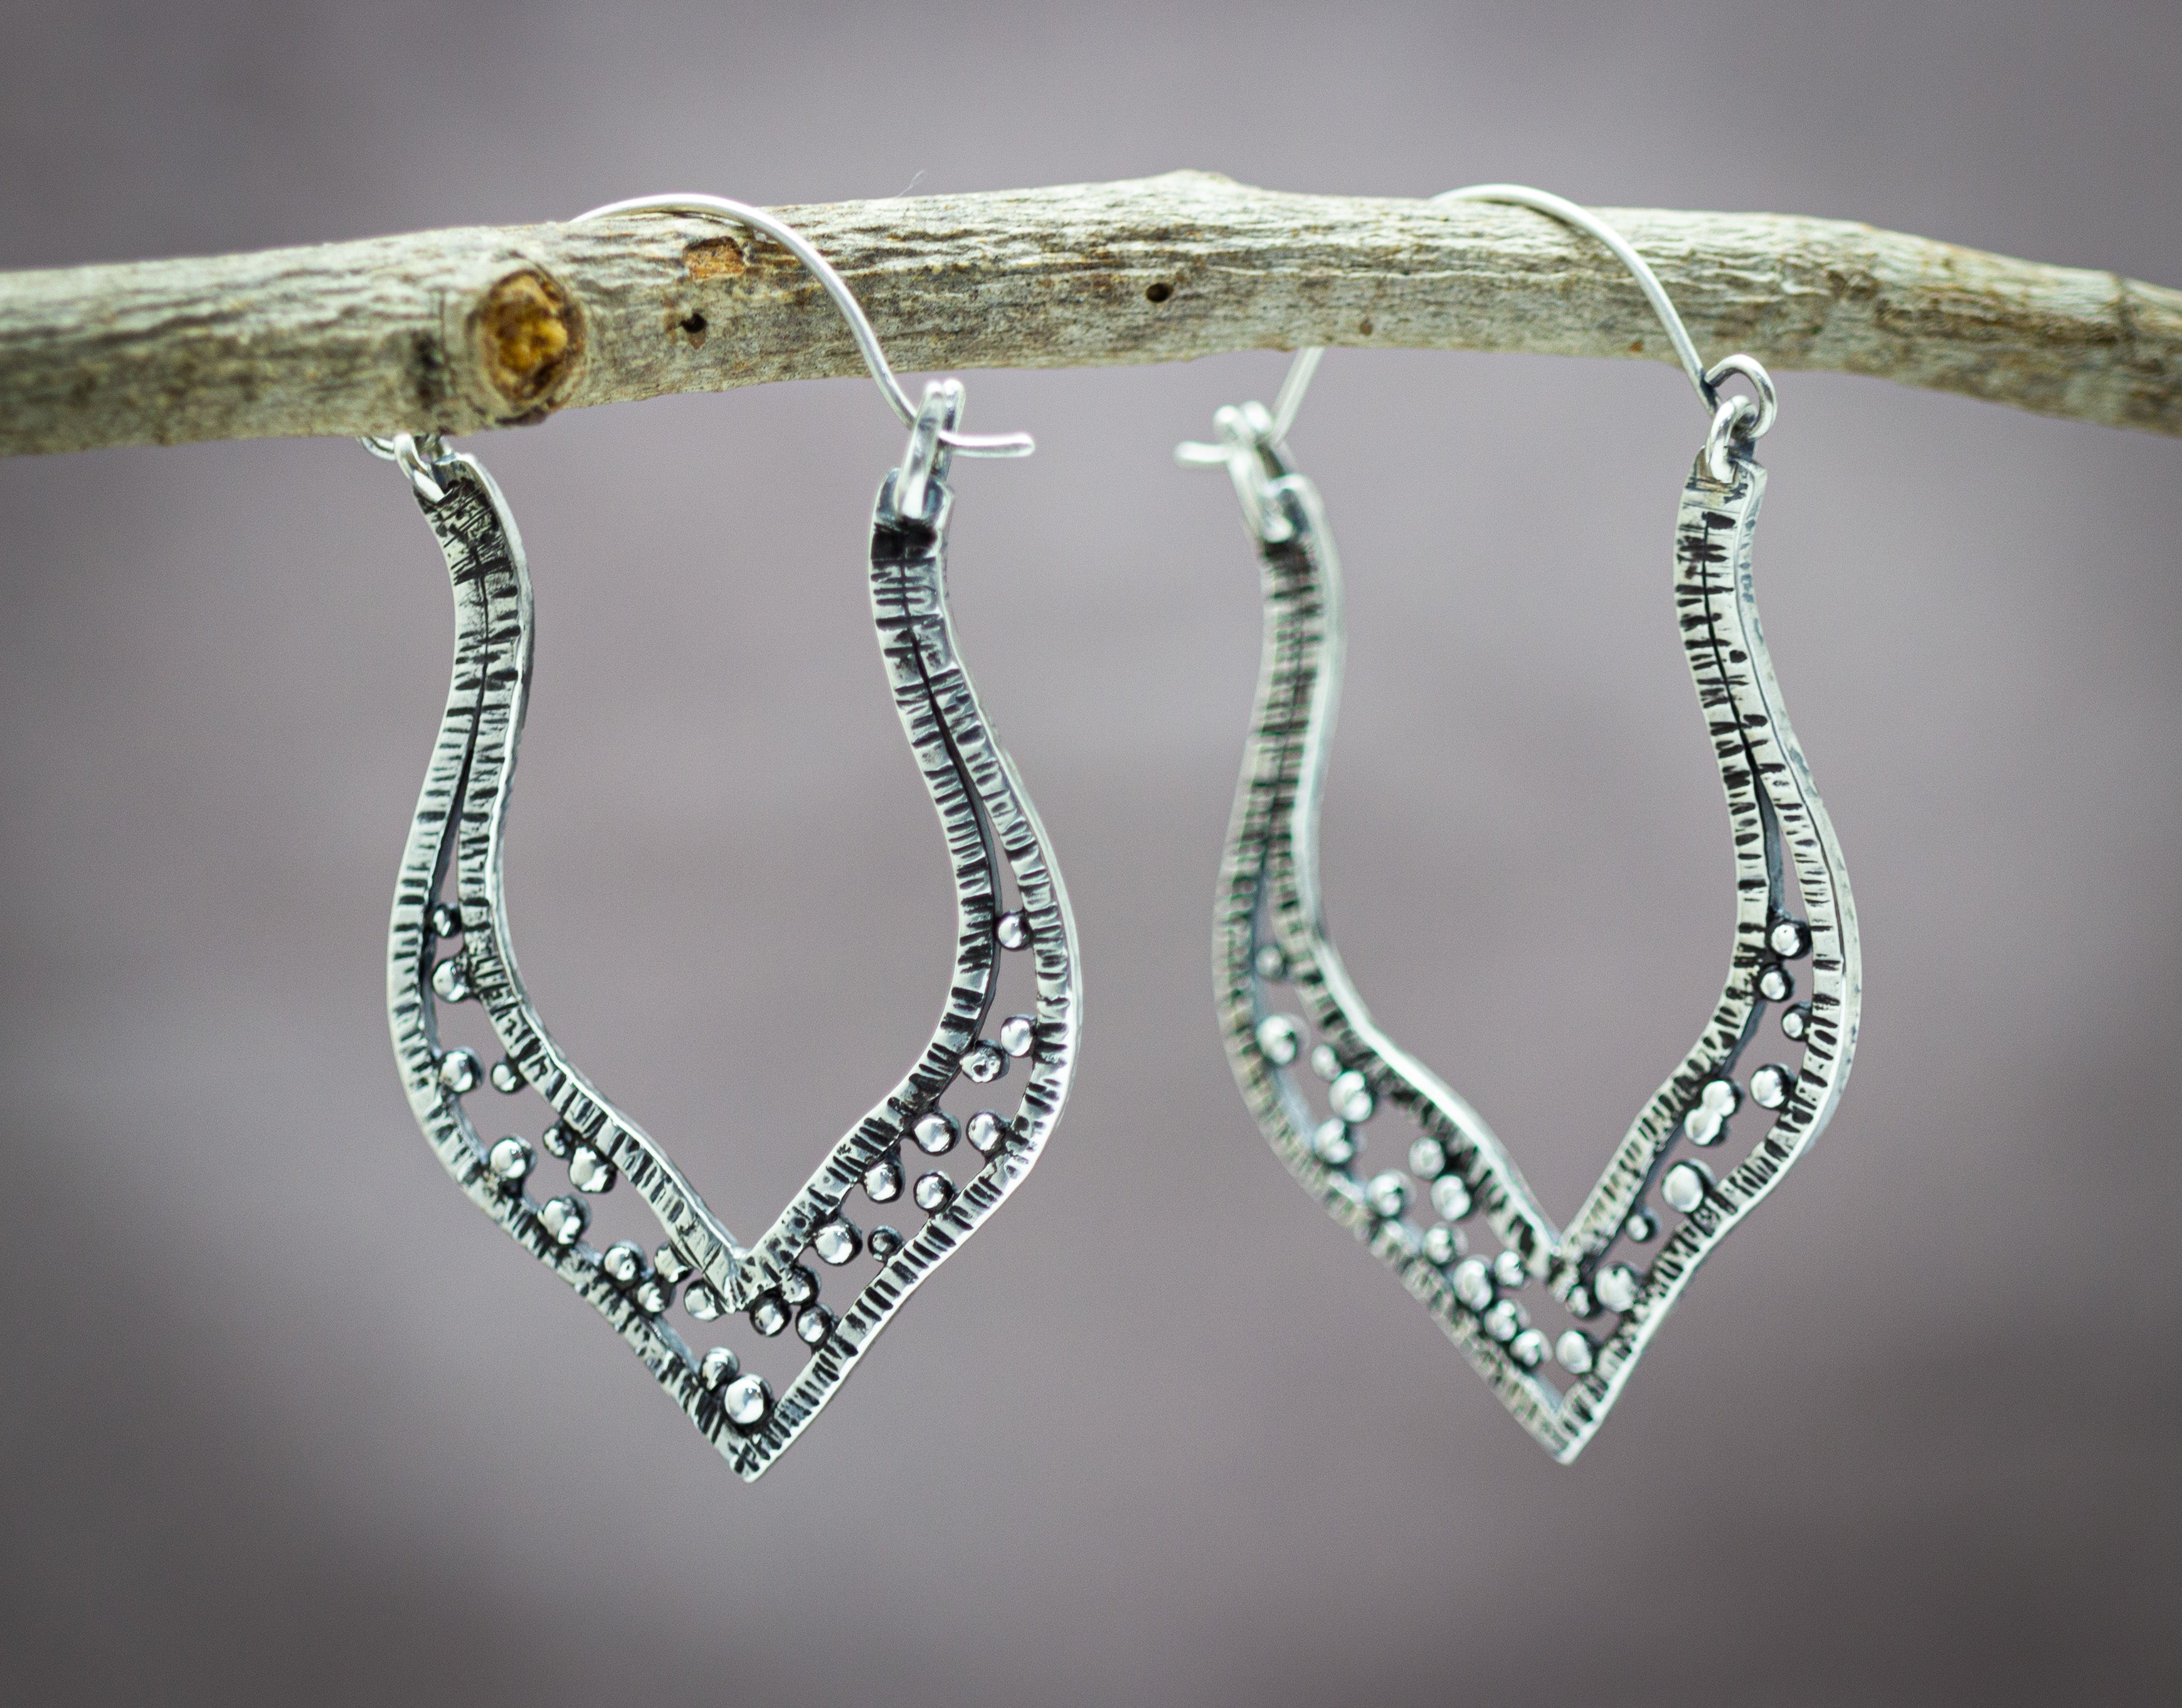 Boho Hoop Earrings Sterling Silver Textured and Hand Forged Granulation Earrings